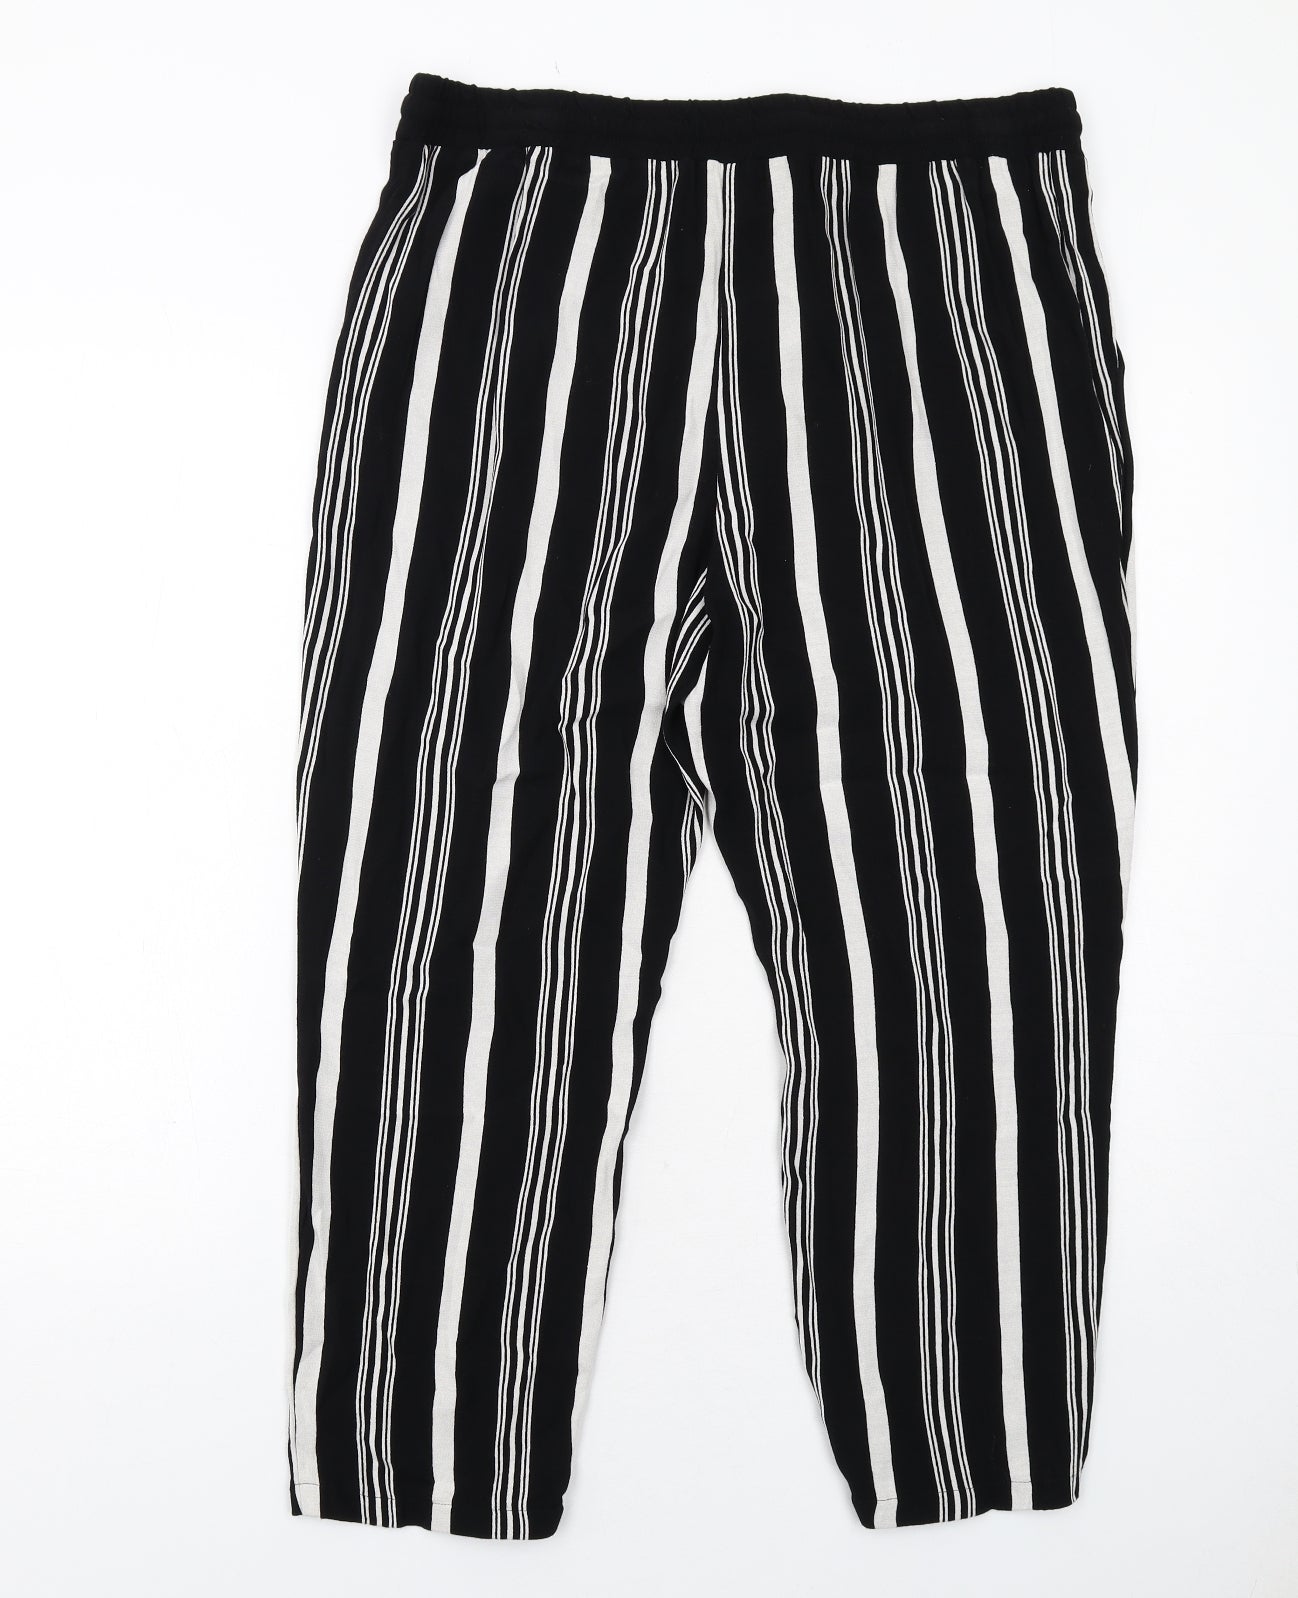 Marks and Spencer Womens Black Striped Viscose Trousers Size 16 Regular Drawstring